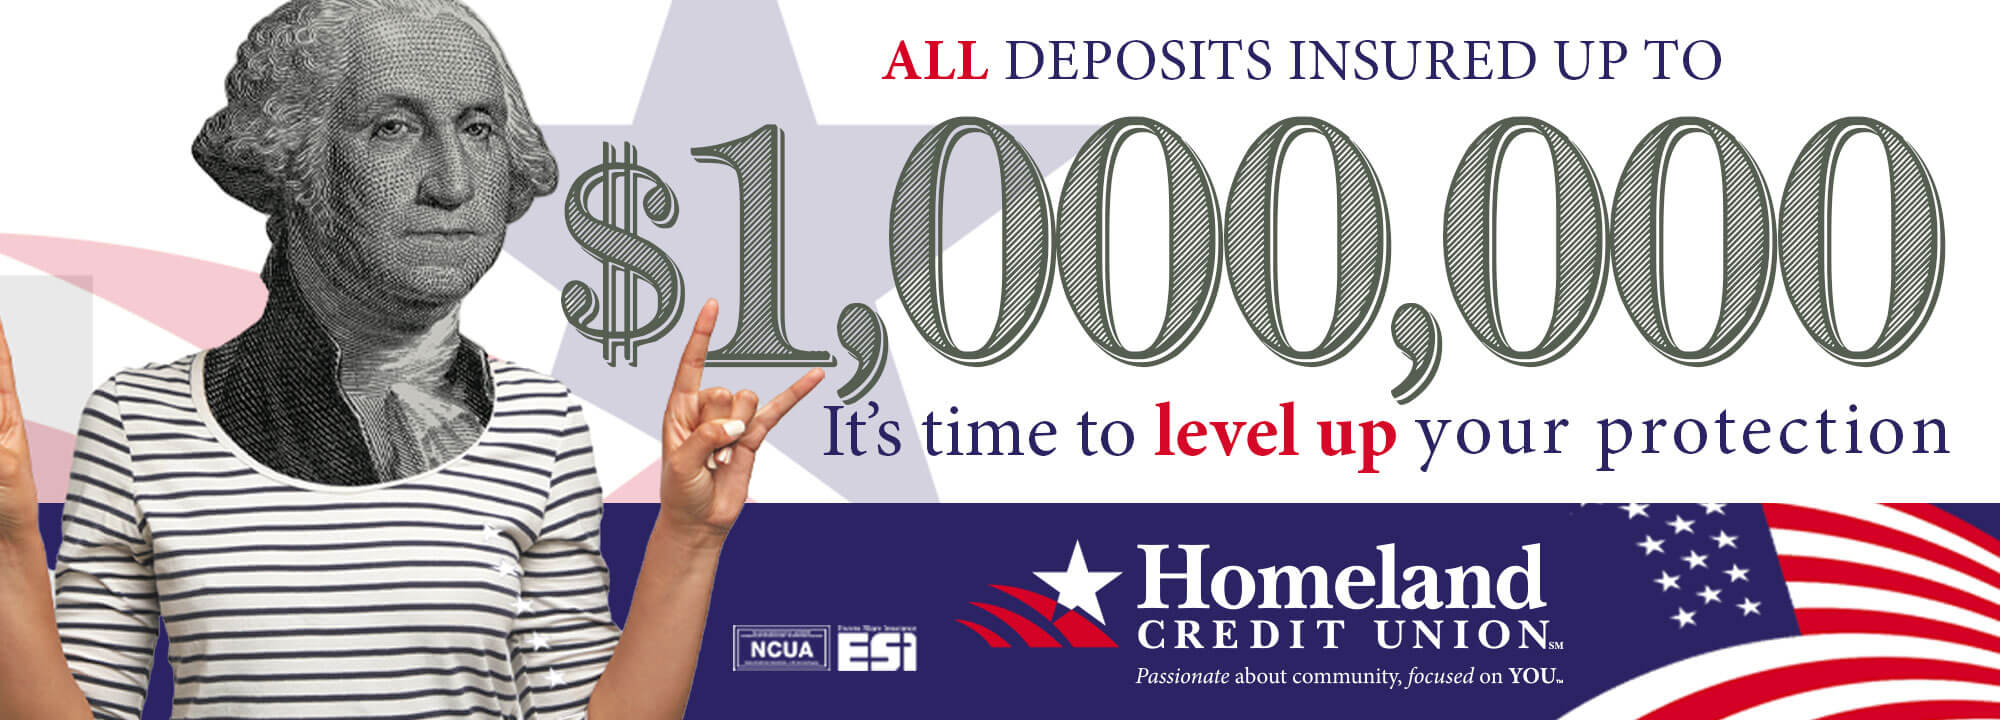 ALL deposits insured up to $1,000,000. It's time to level up your protection. Homeland Credit Union. Passionate about Community, Focused on YOU. Member NCUA. ESI Excess Share Insurance.